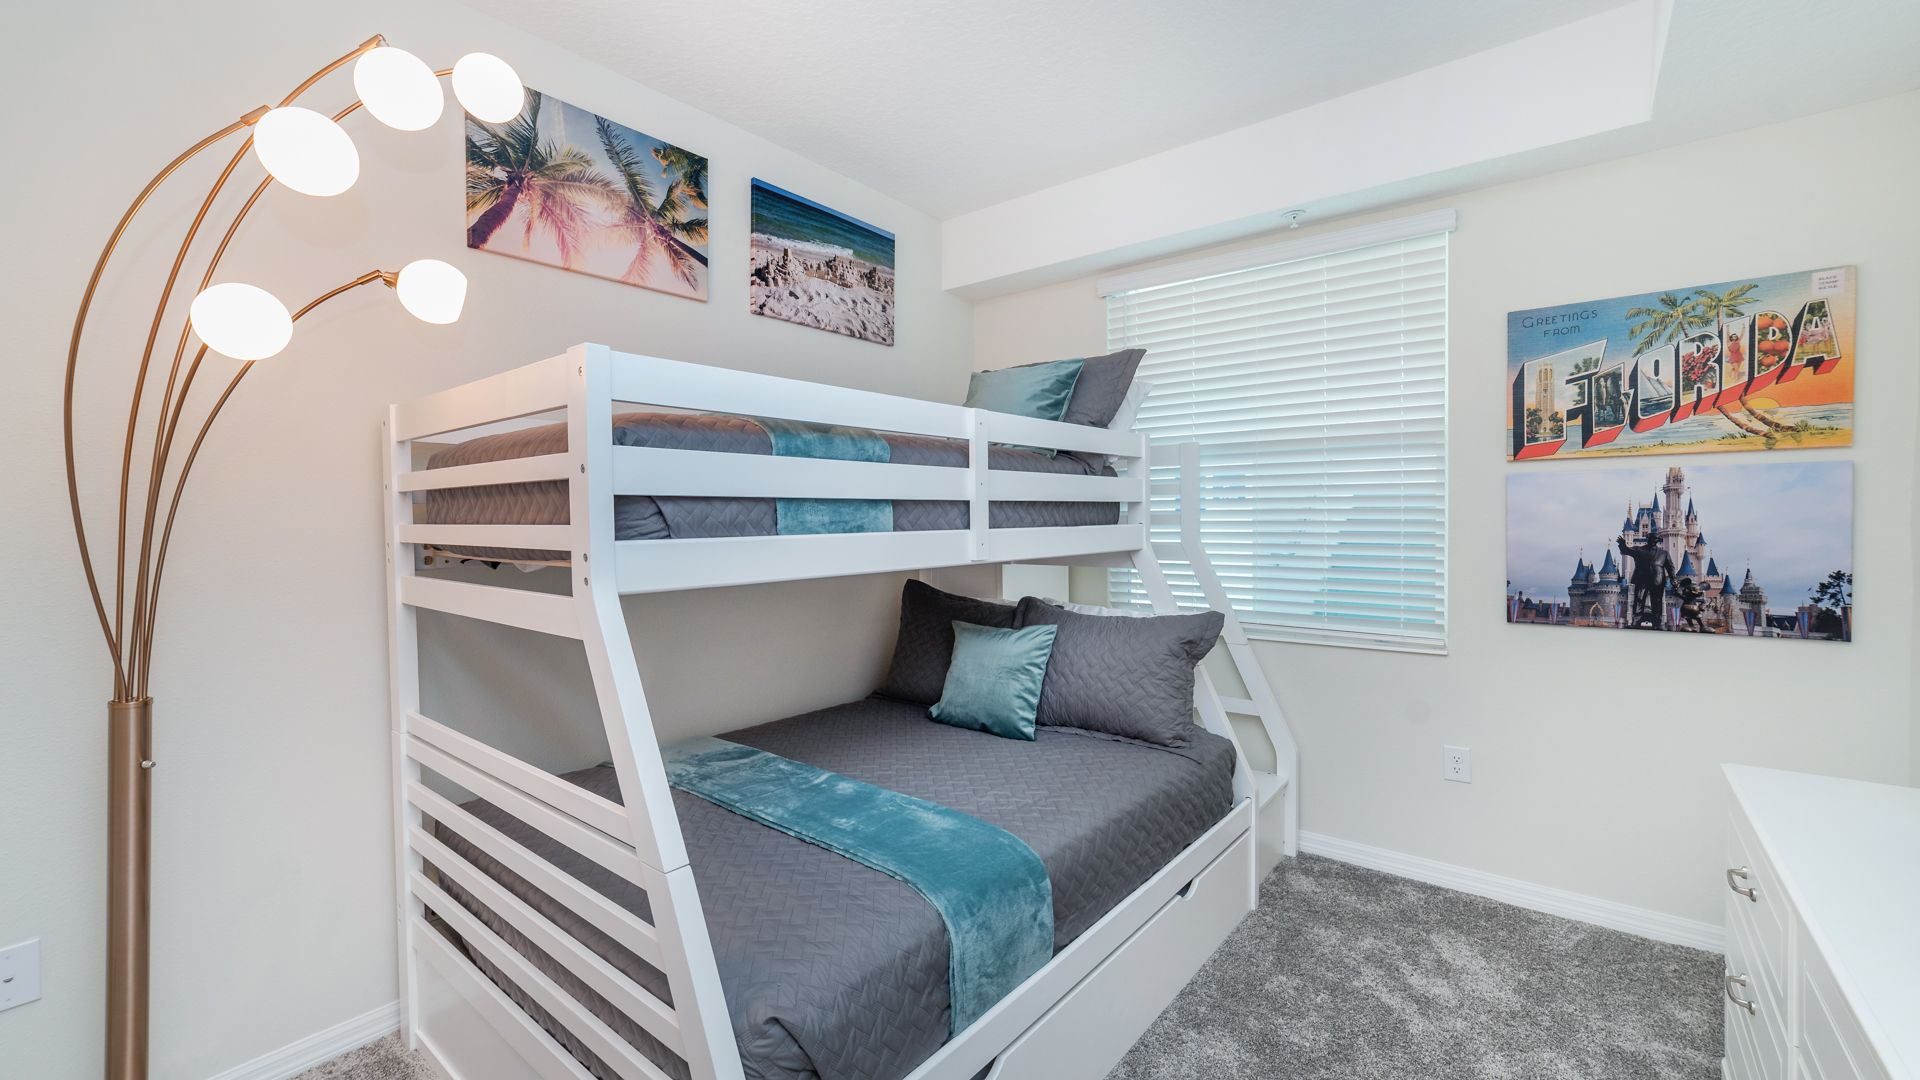 Twin/Double Bunk Bedroom 2
With Twin Trundle Bed